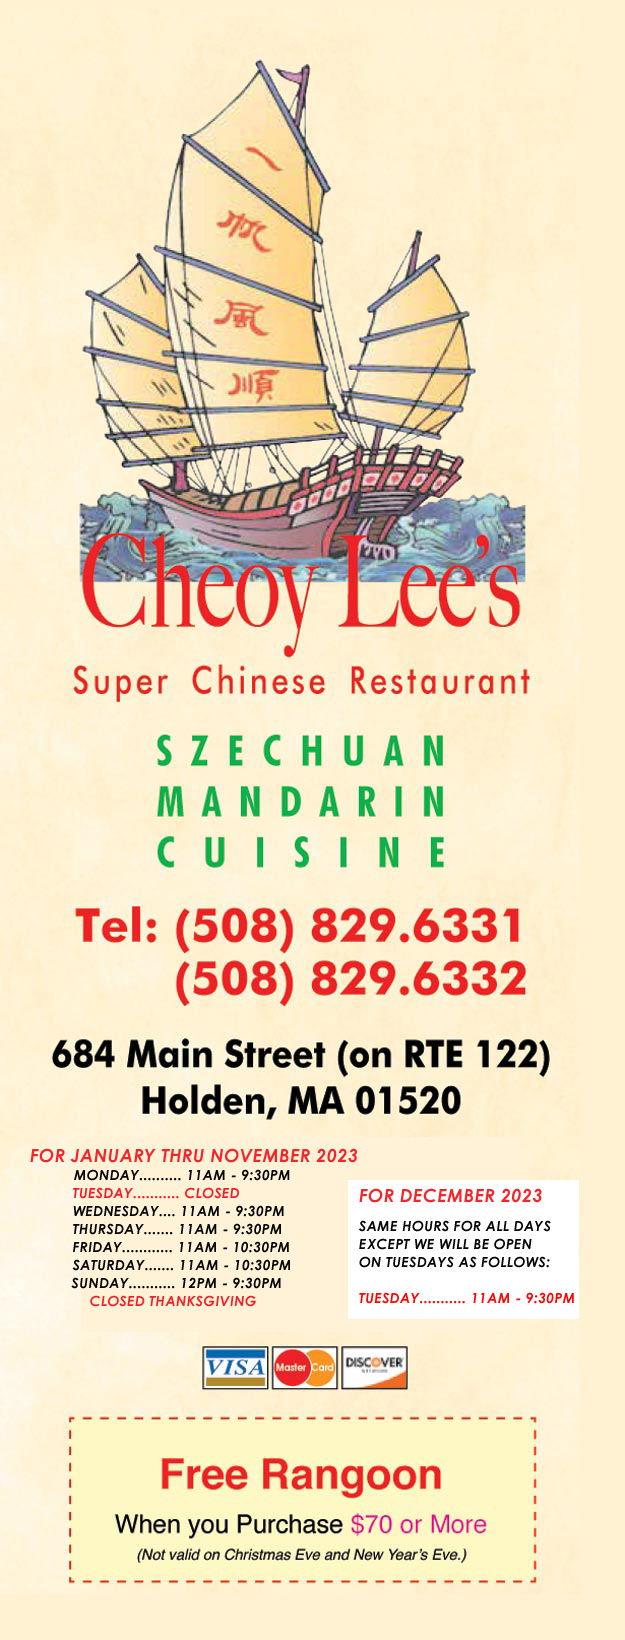 Cheoy Lee's Chinese Restaurant and Takeout MENU, Holden, MA